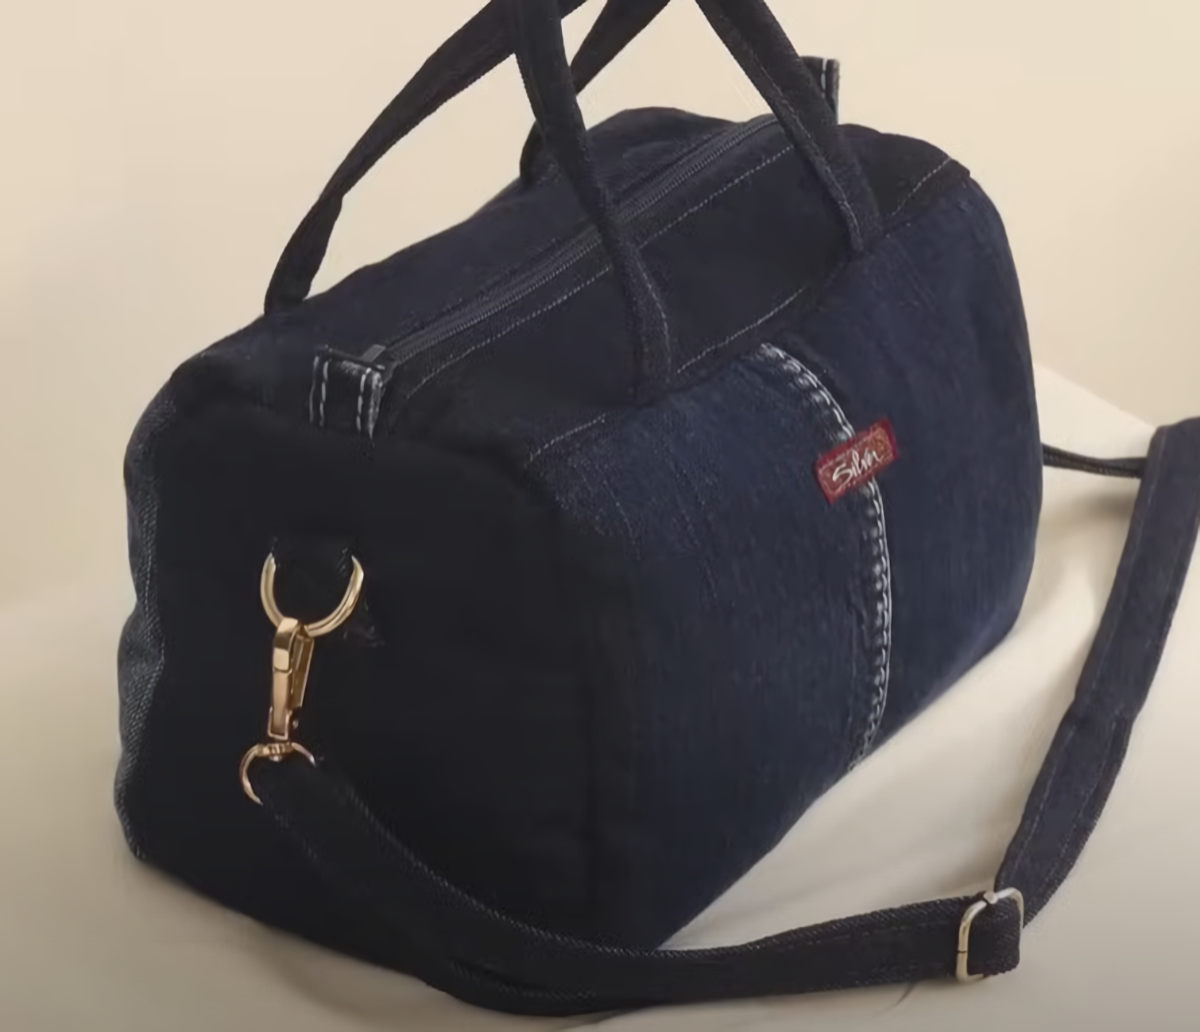 blue jean craft bag with handle and straps